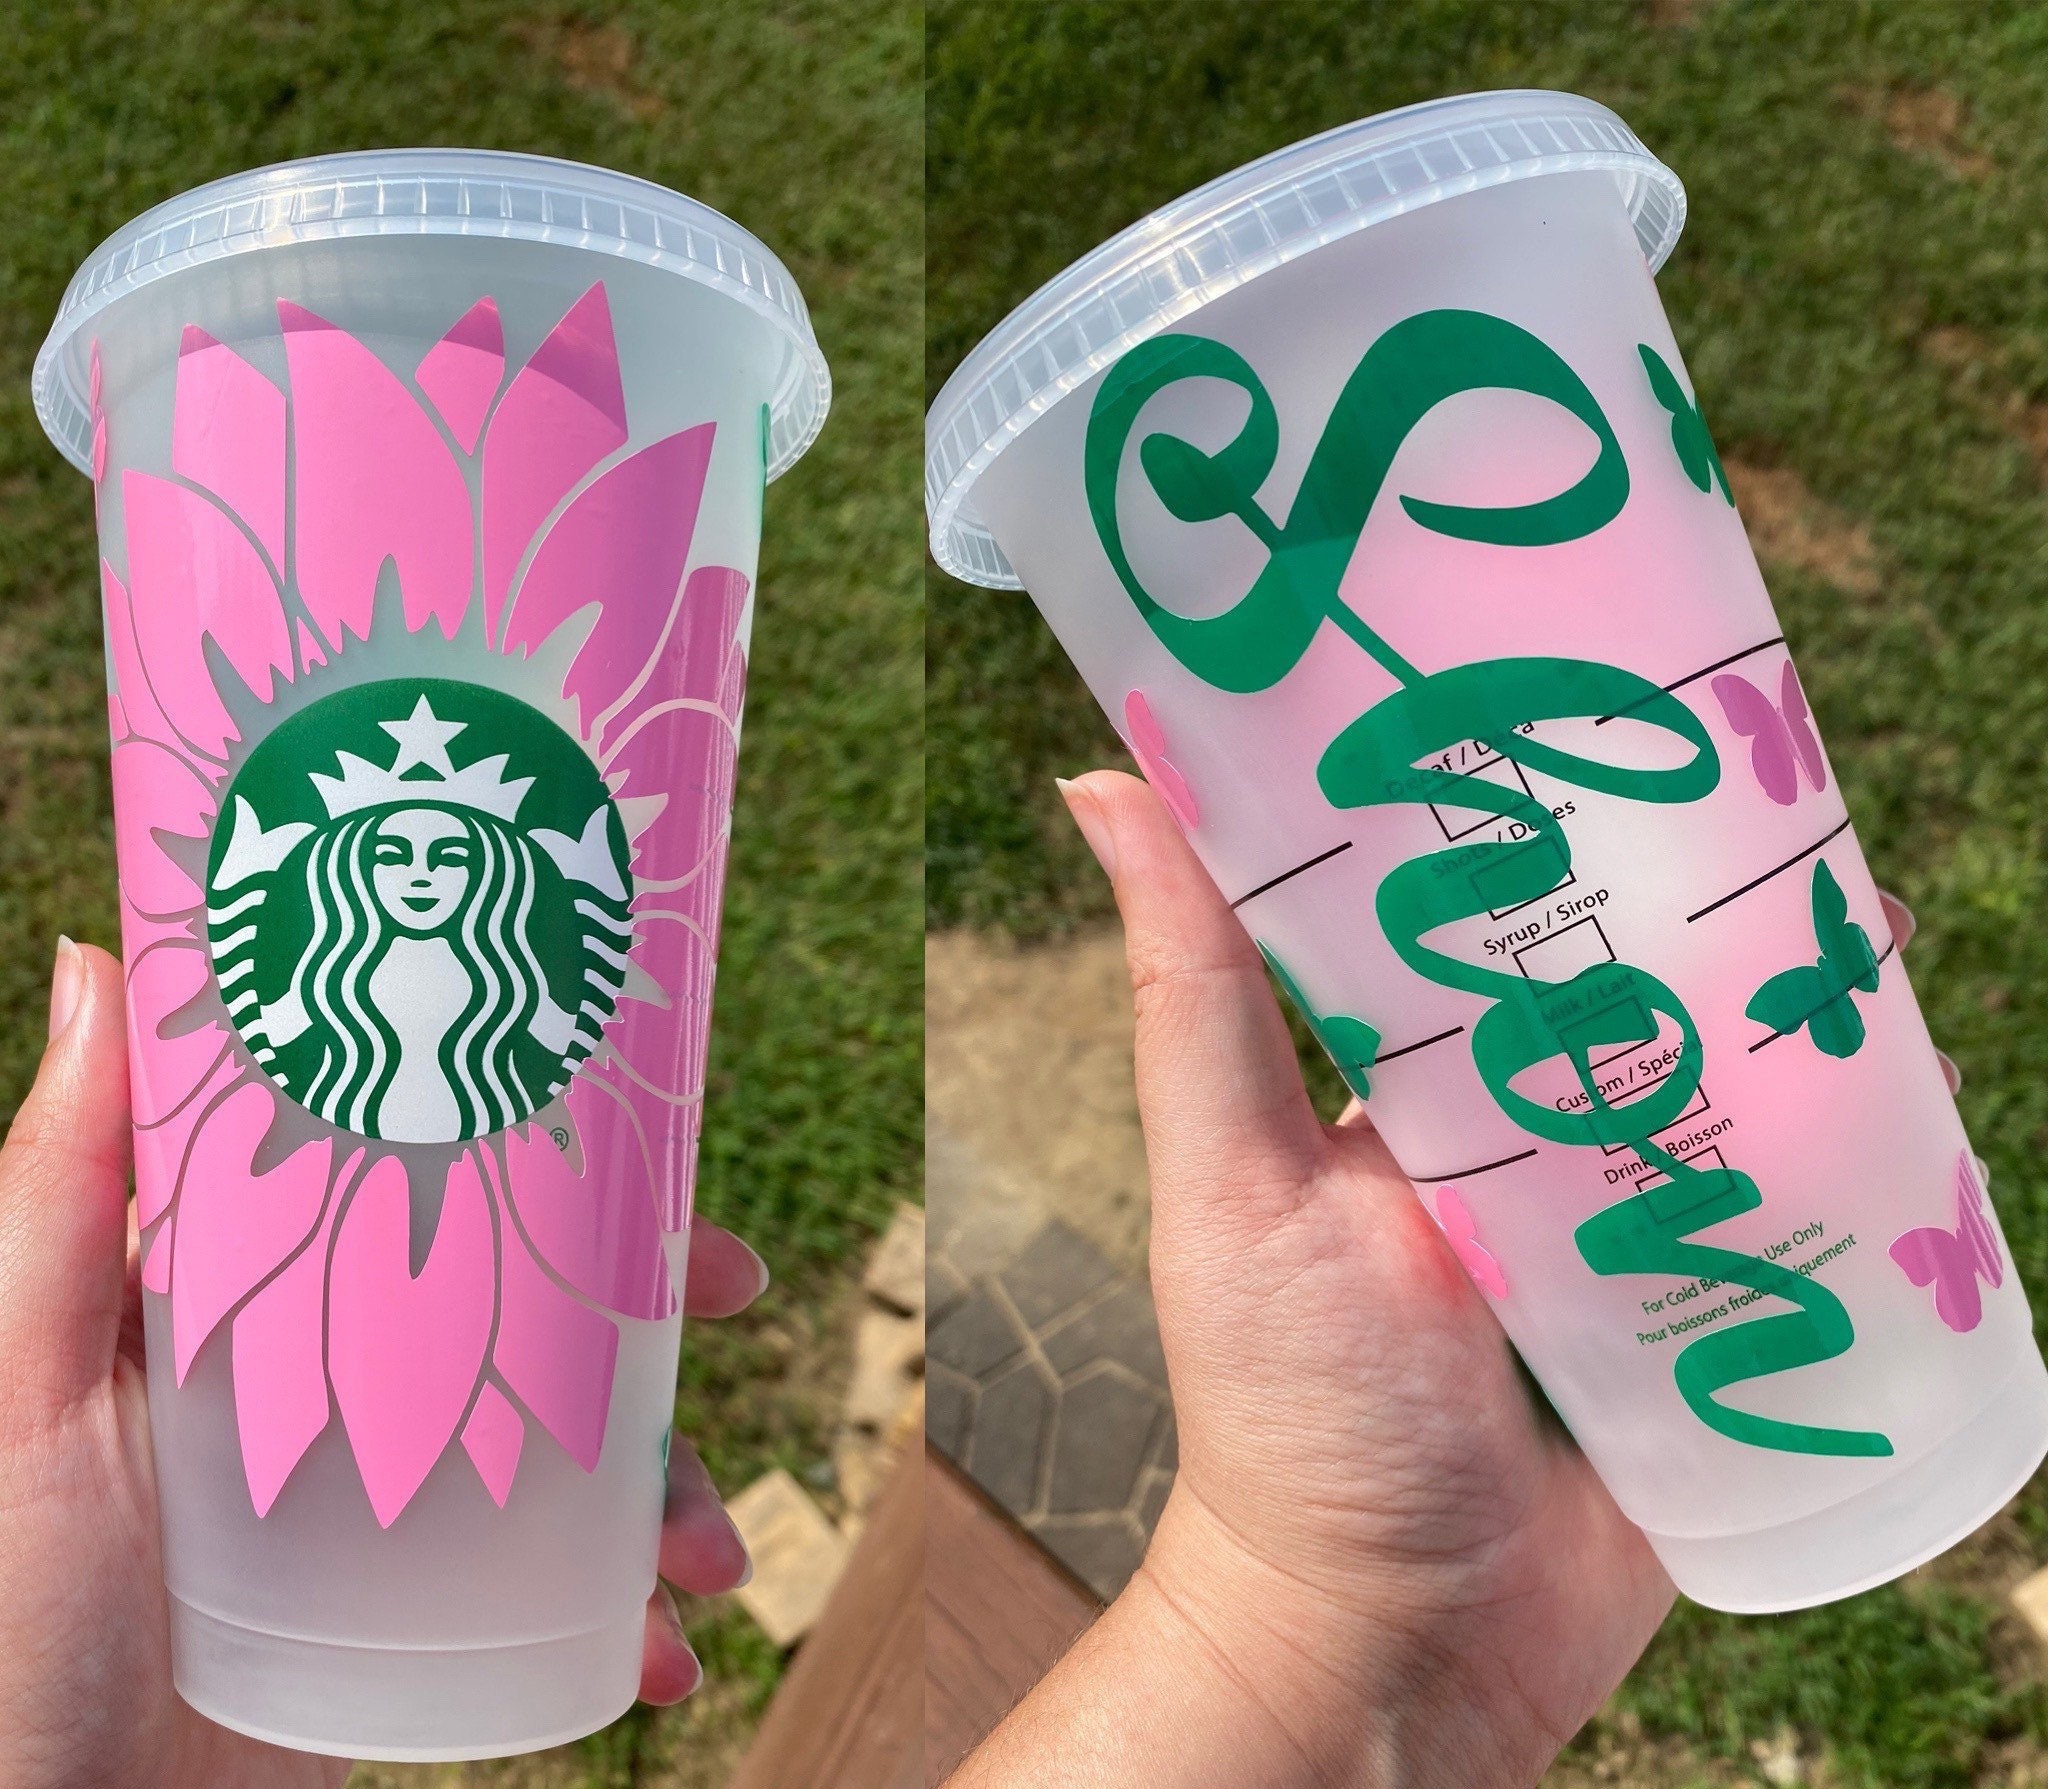 Personalized Sunflower & Butterfly Starbucks Cup | Customized Starbucks Cup  with name | Starbucks reusable flower cup | Custom Butterfly Cup